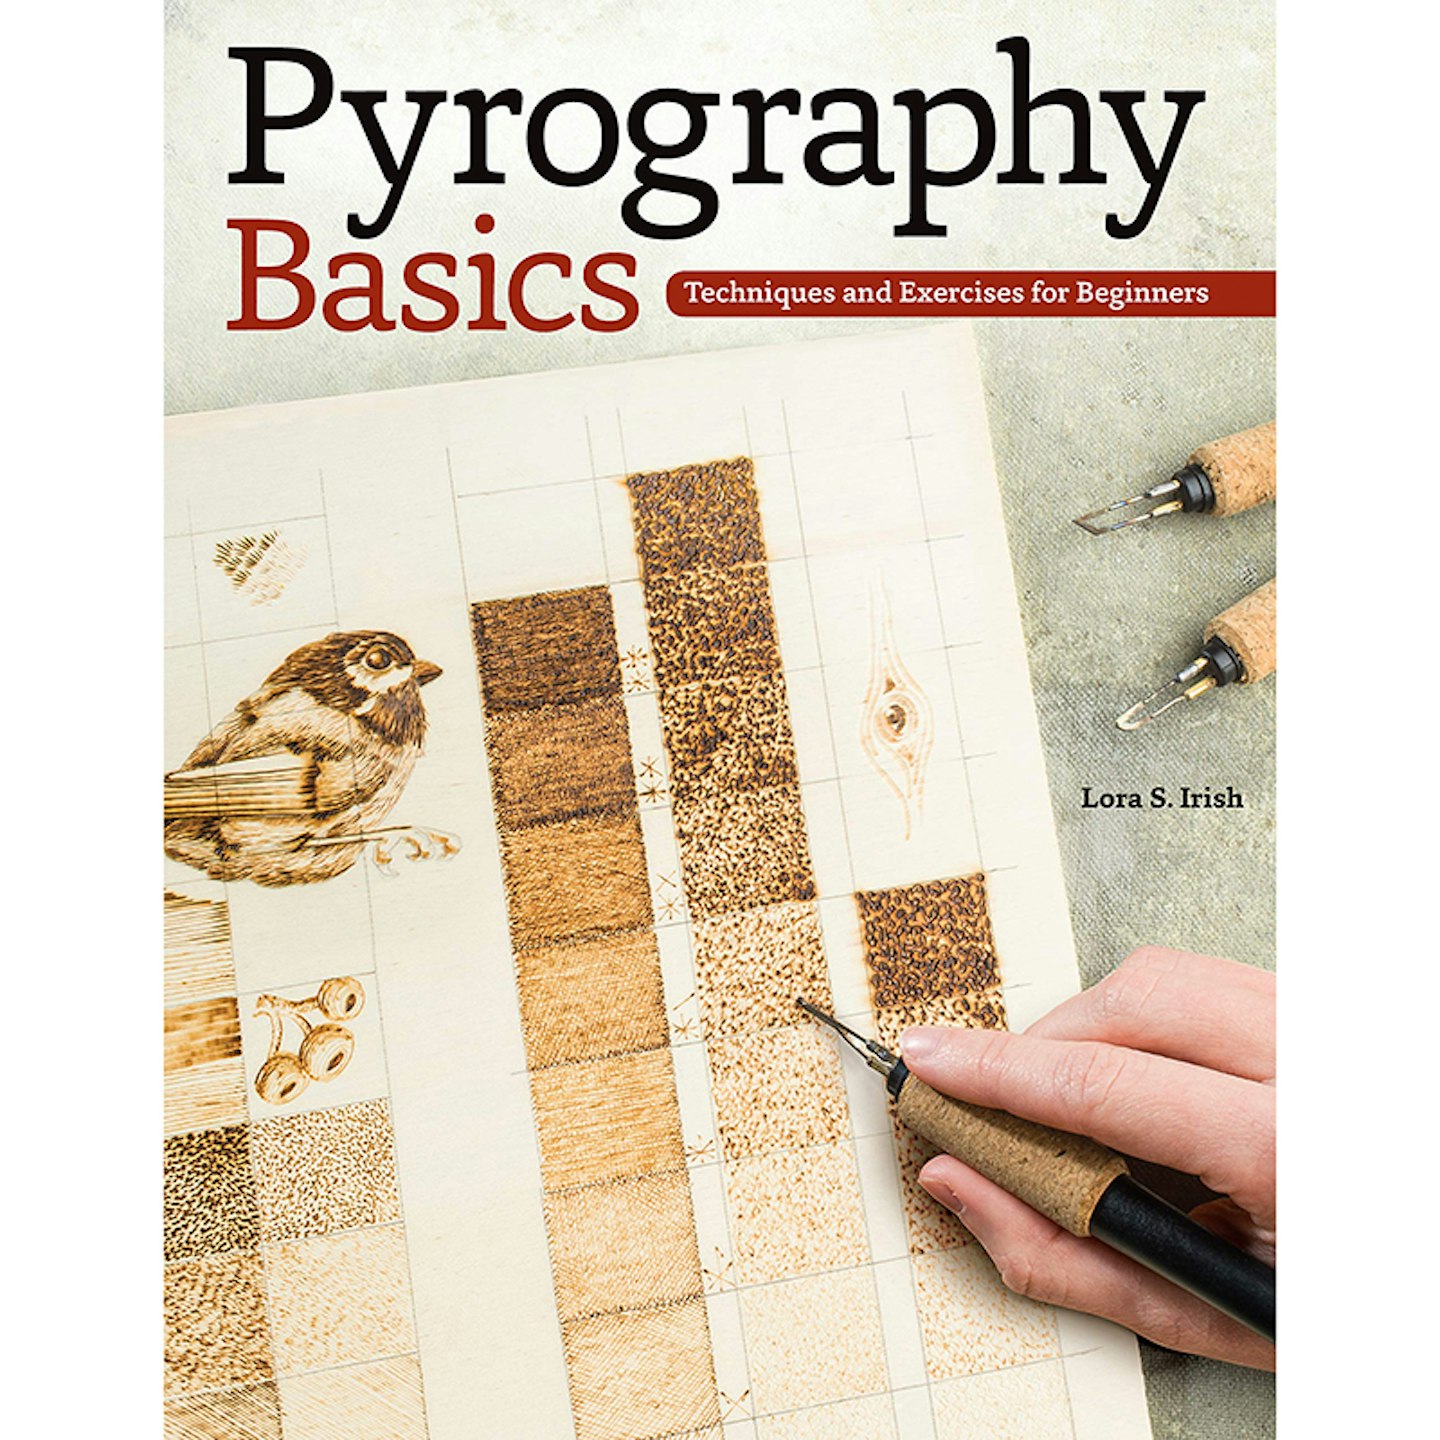 Pyrography Basics: Techniques and Exercised for Beginners by Lora Irish